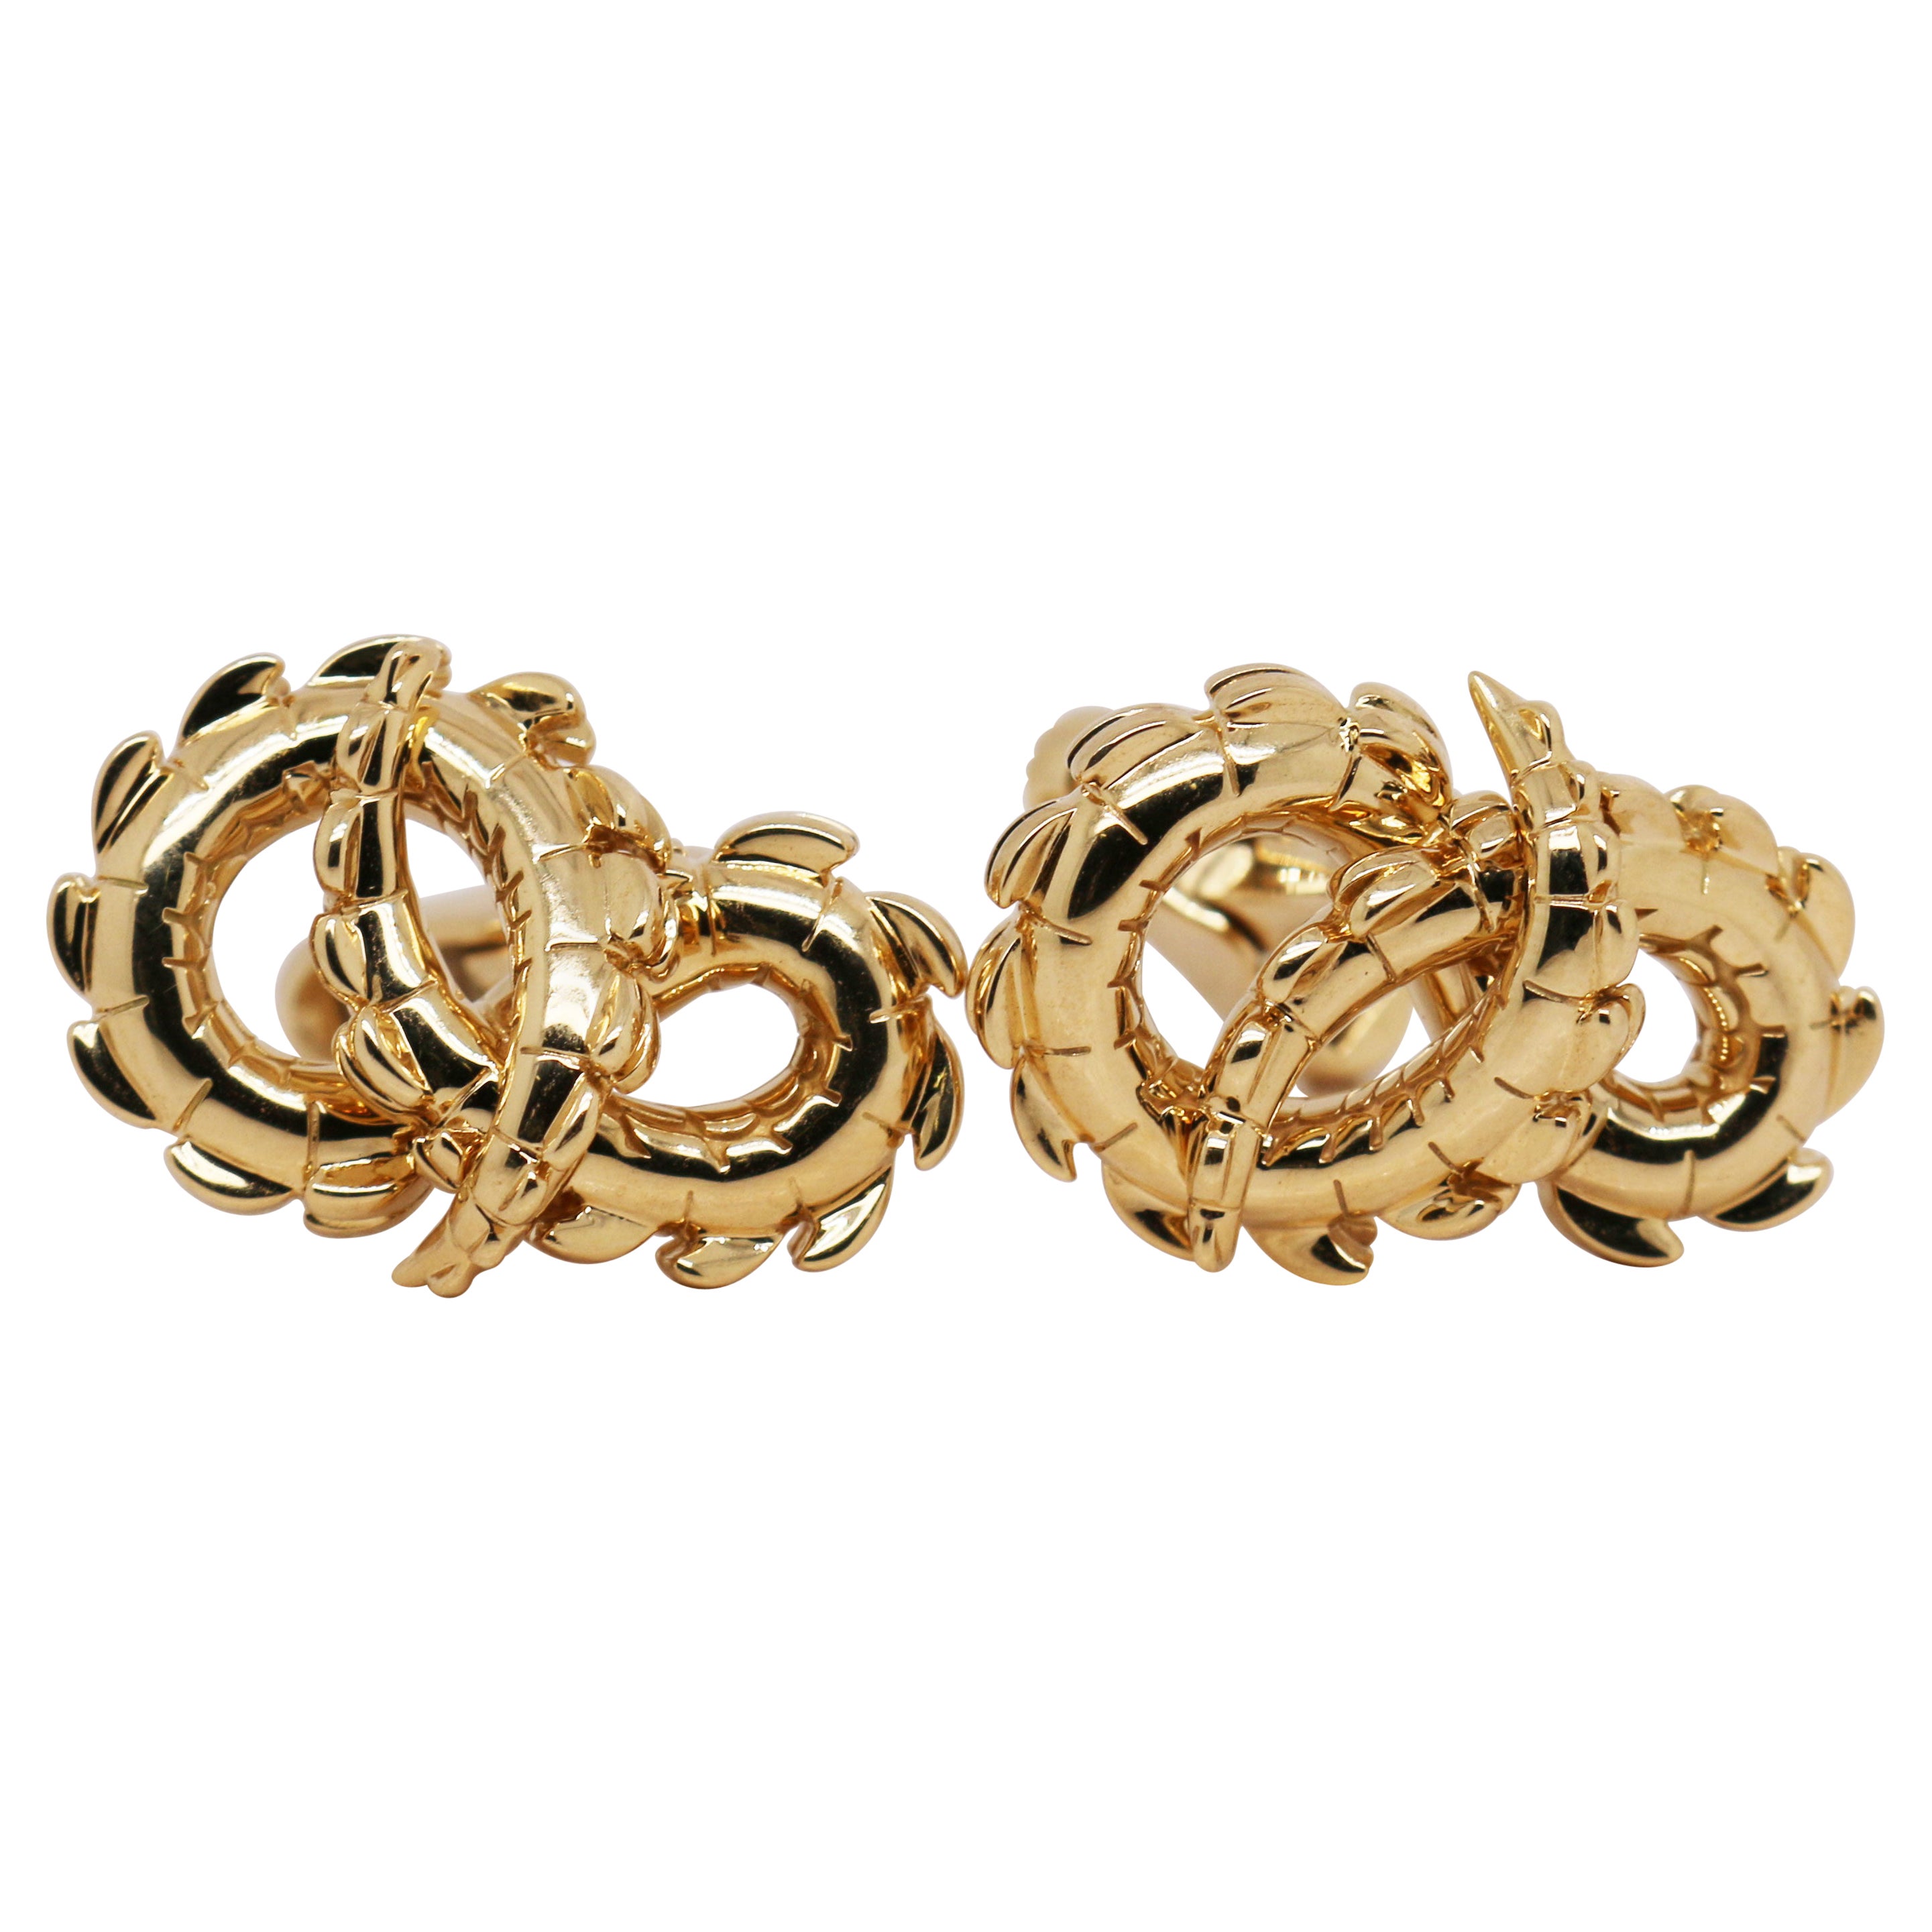 Crocodile Tail Cufflinks in Solid 18ct Yellow Gold